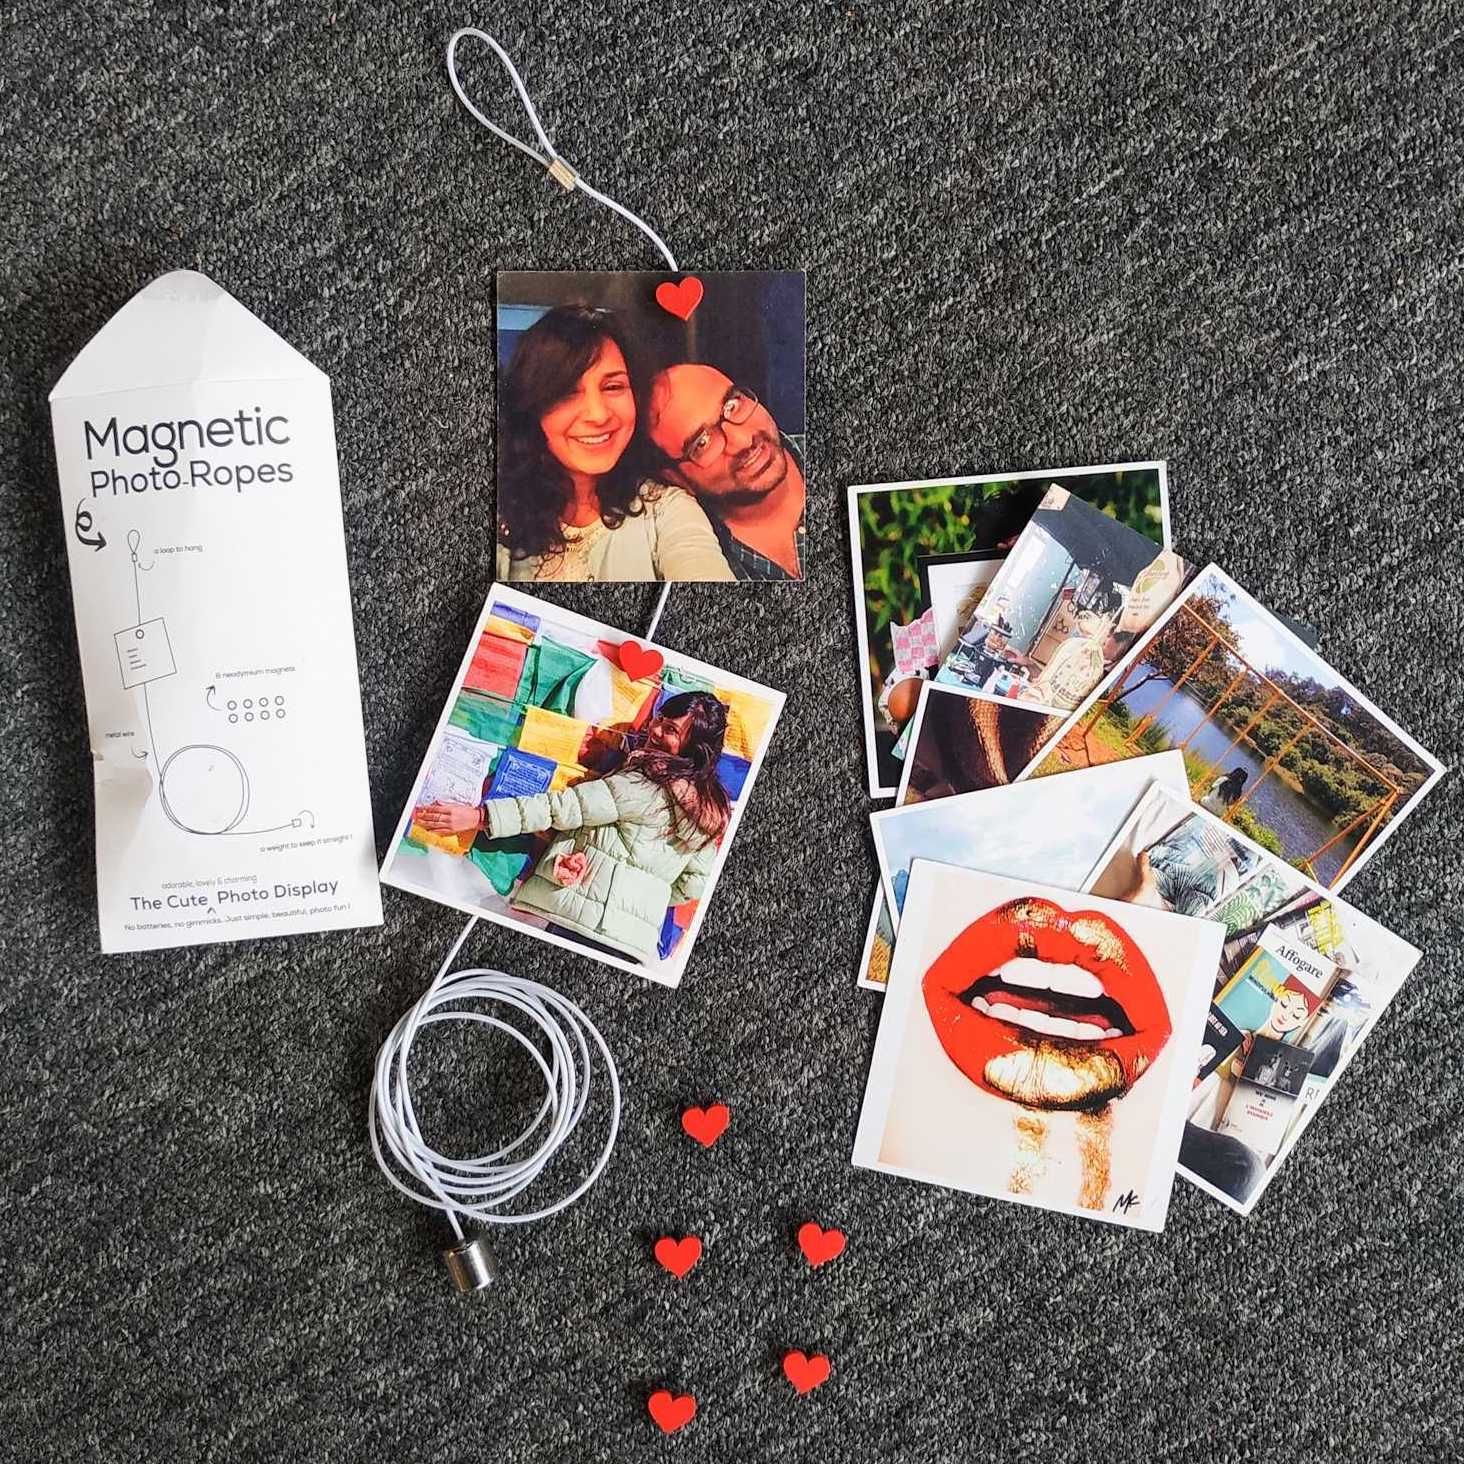 A cute photo hanging on magnetic photo rope